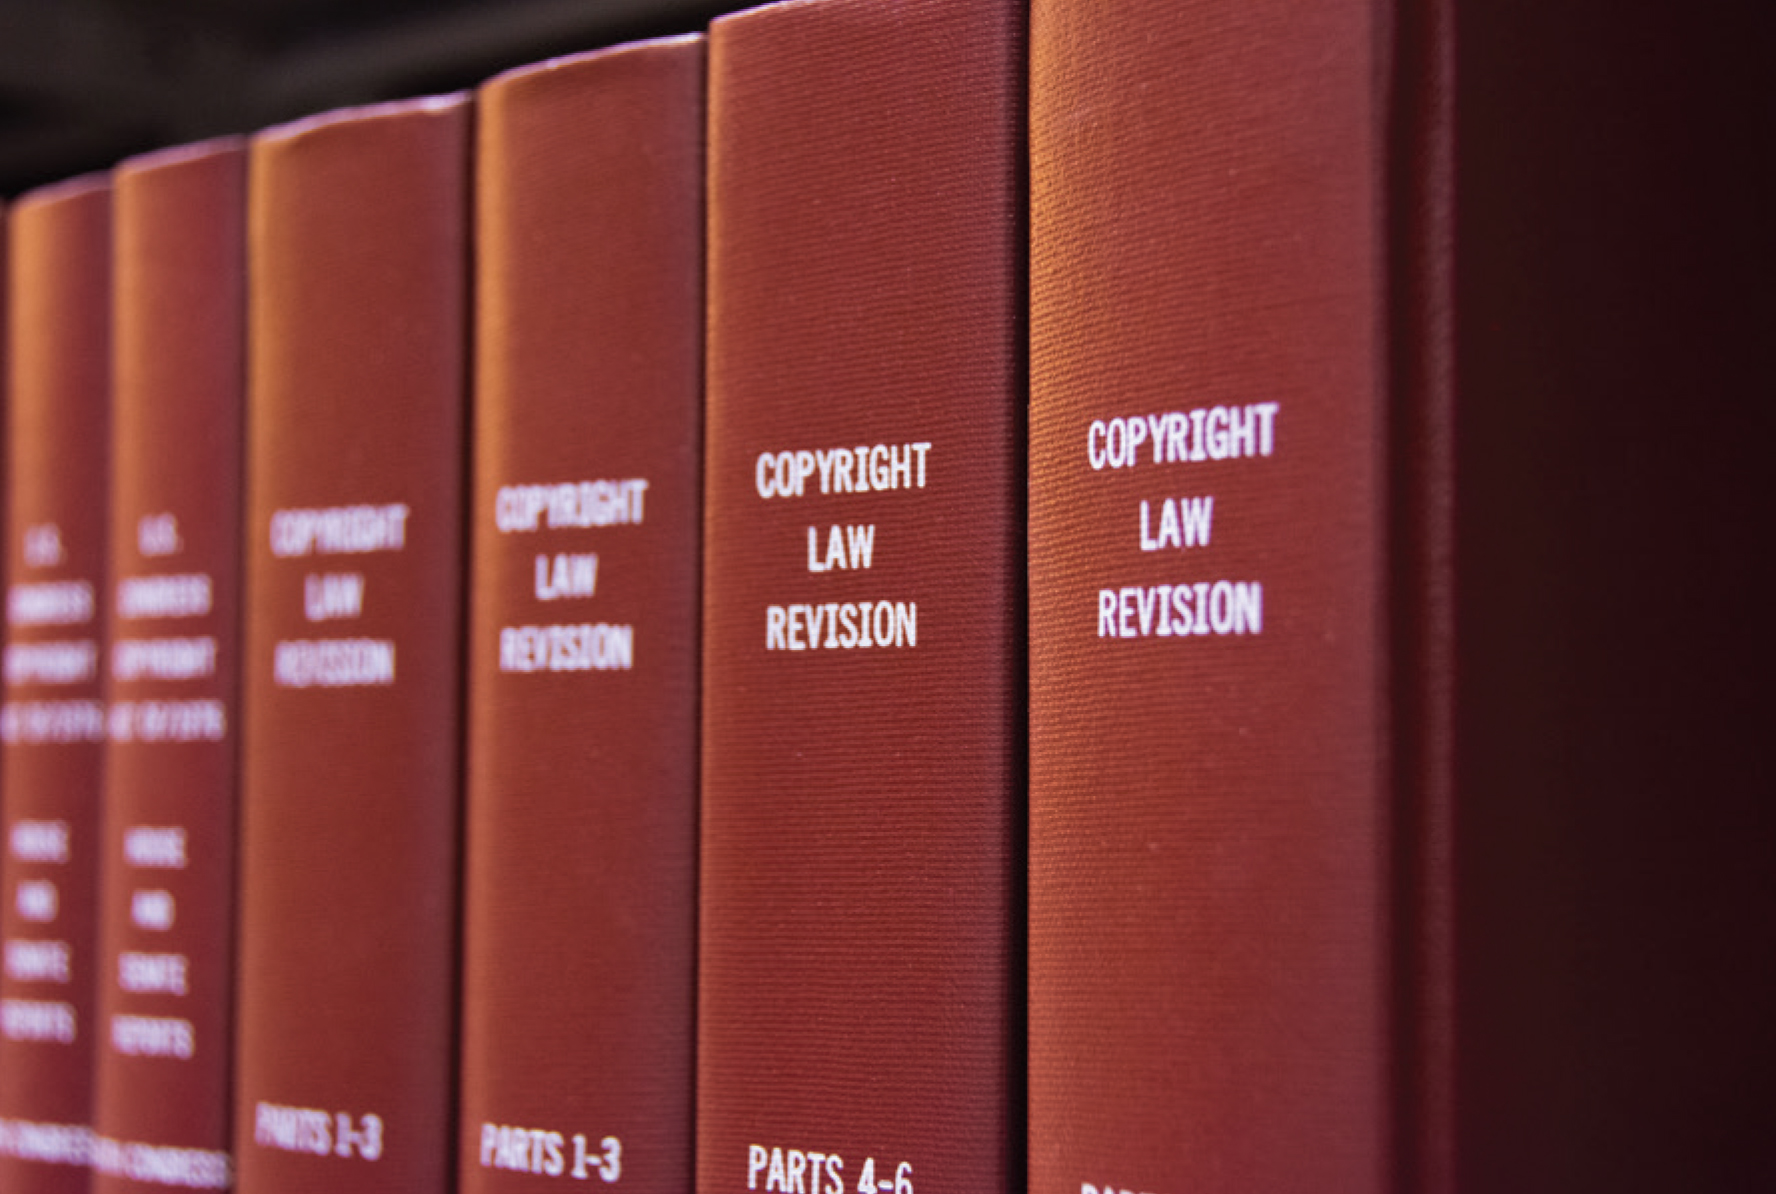 Row of Copyright Law books